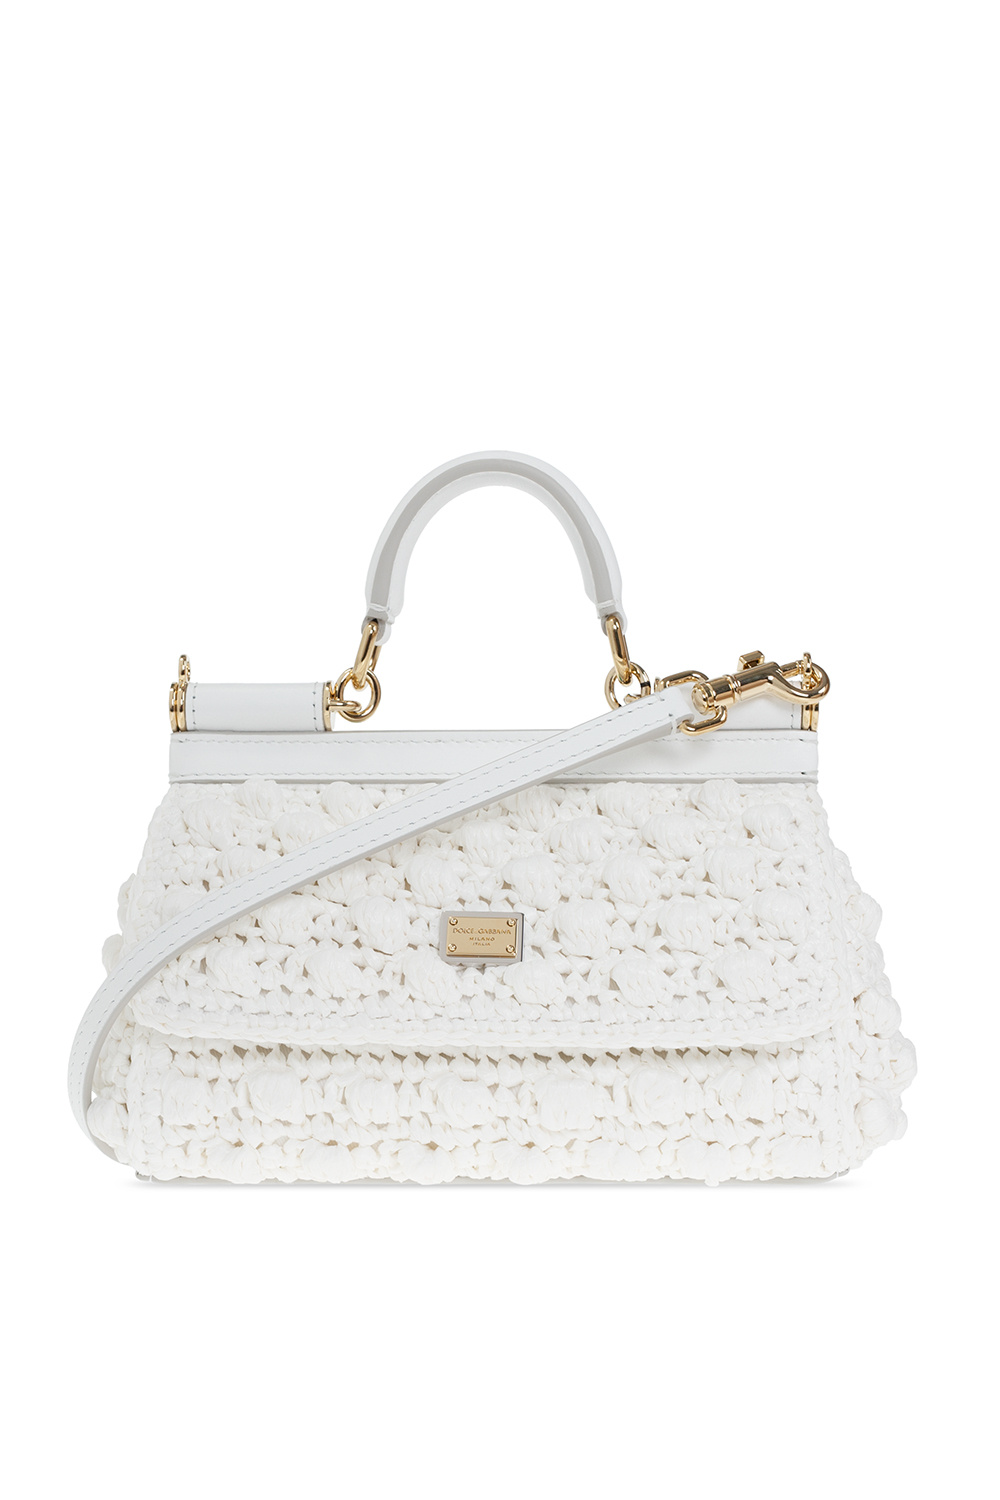 Dolce & Gabbana Sicily - Pre-owned Women's Leather Cross Body Bag - White - One Size